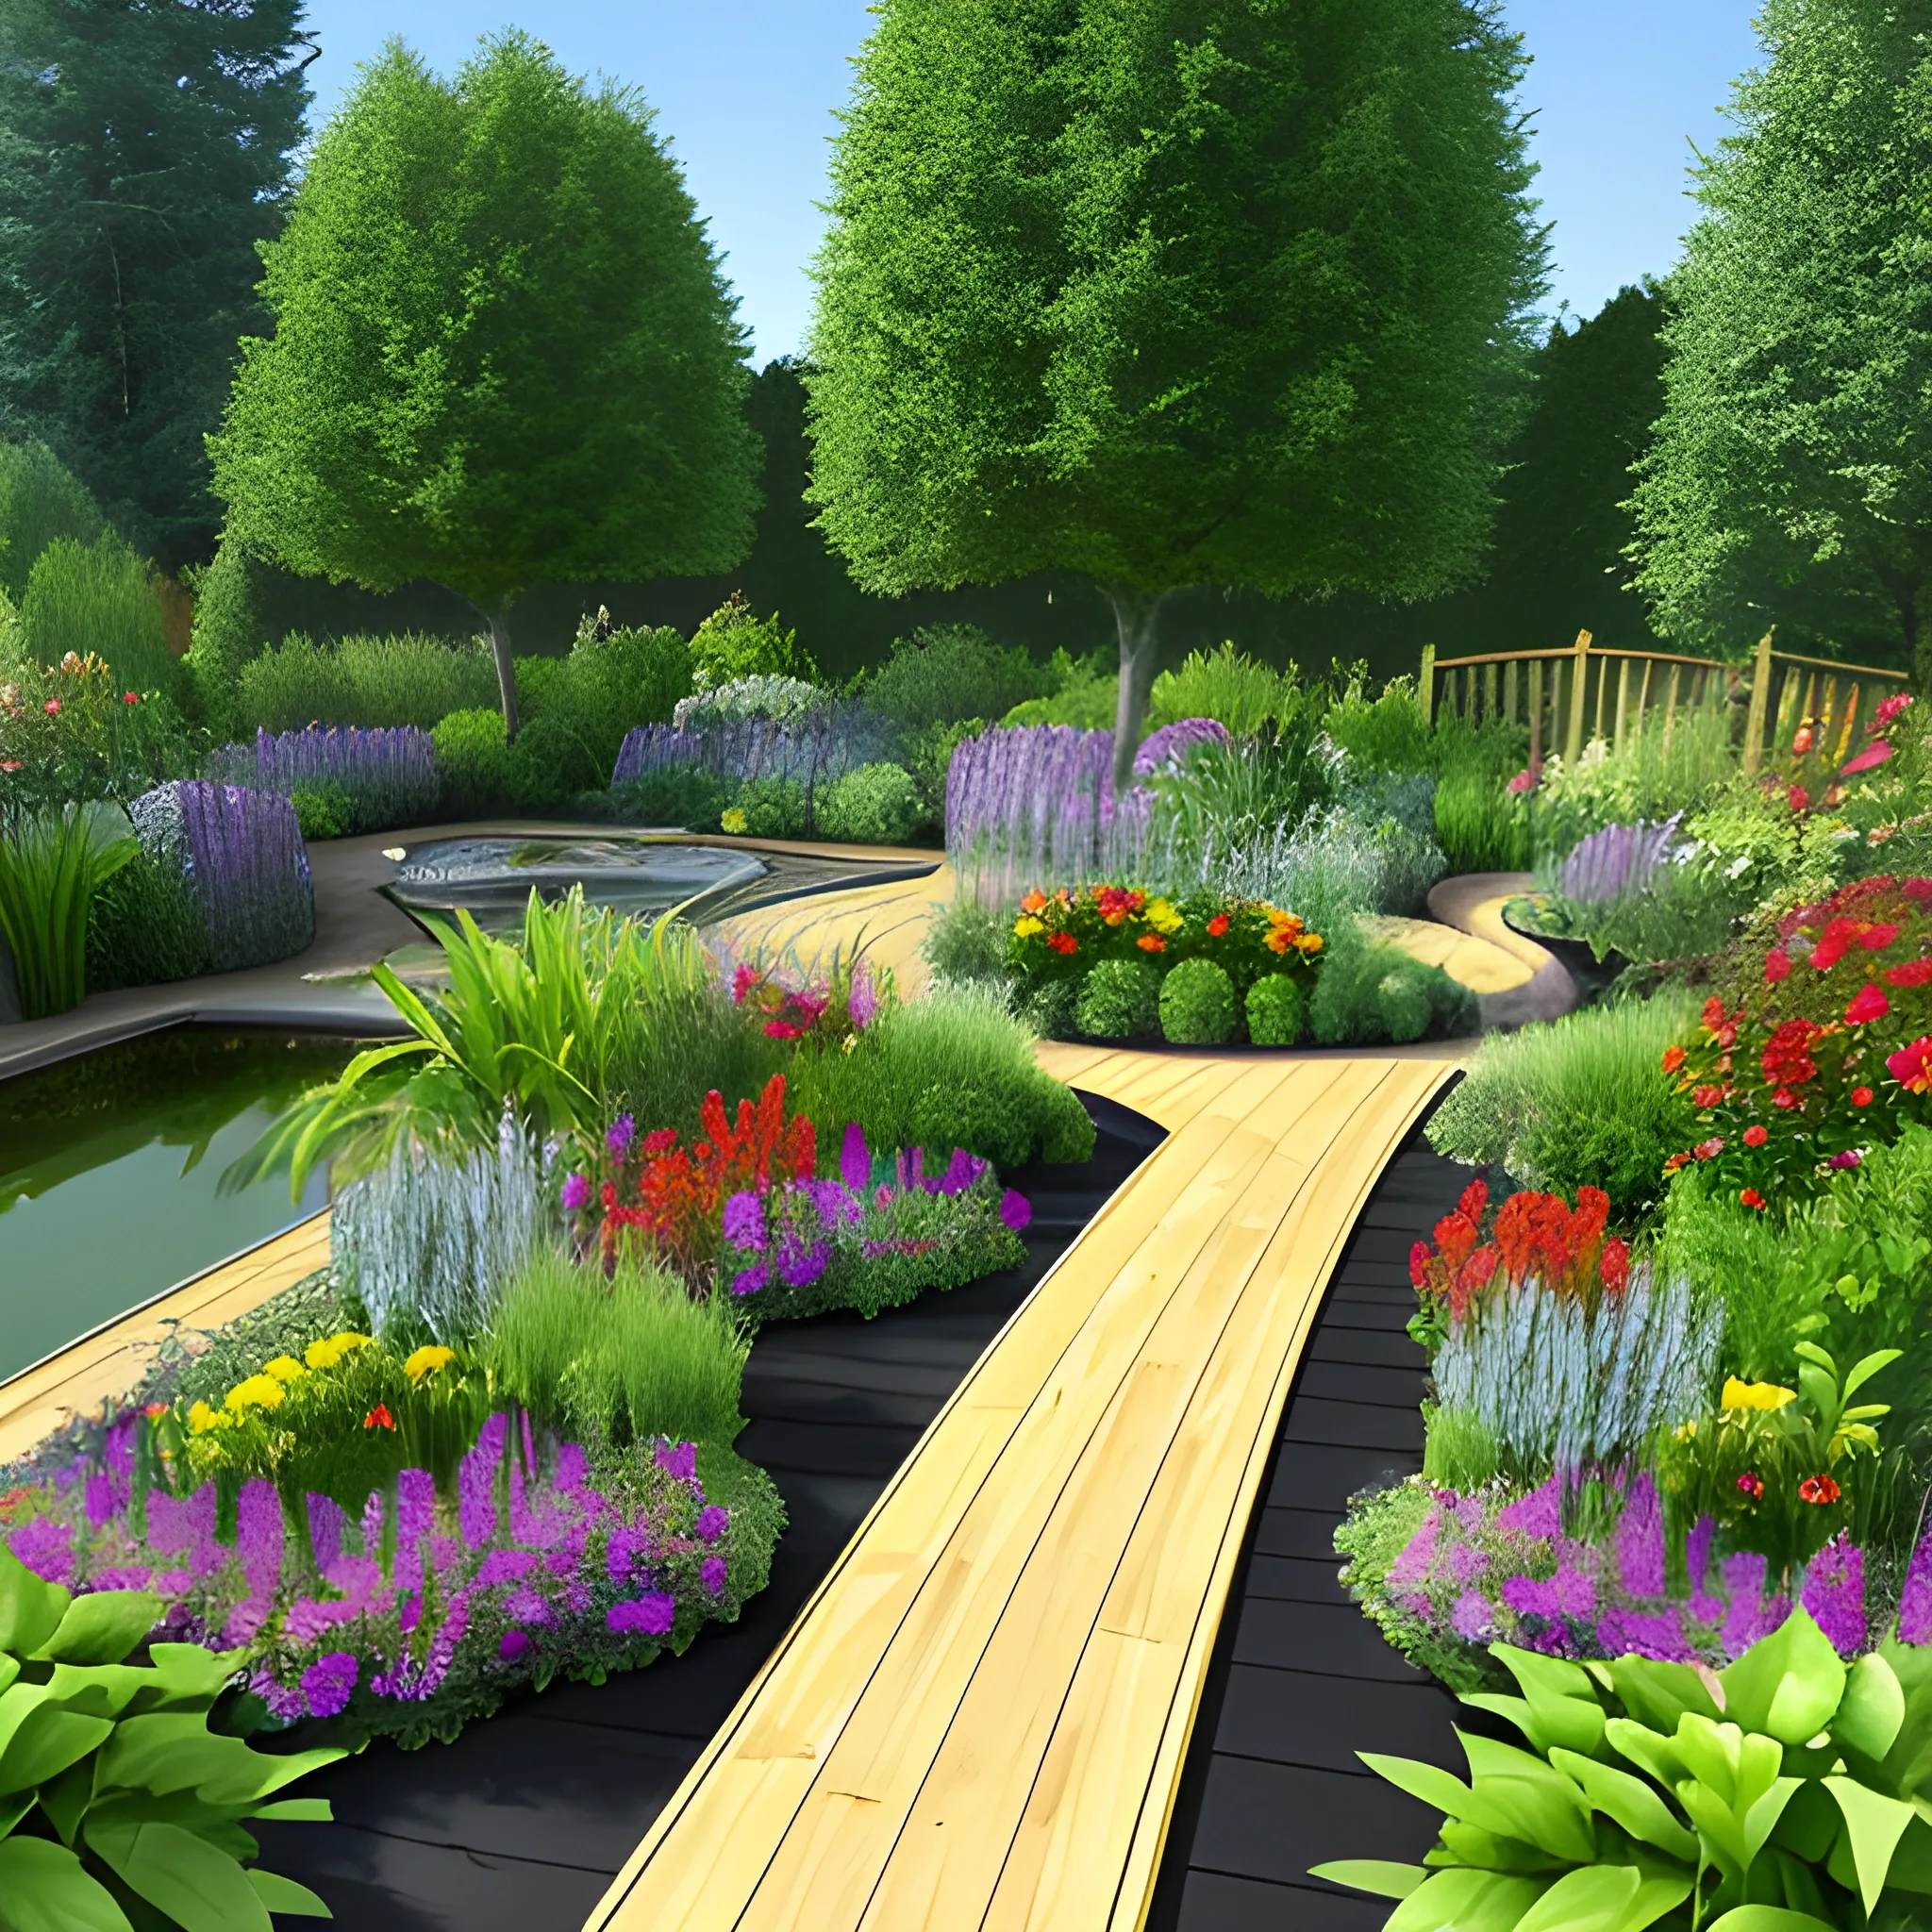 garden with a wooden decking path that winds through plants and a pond, sunshine, small trees, flowers, 3D